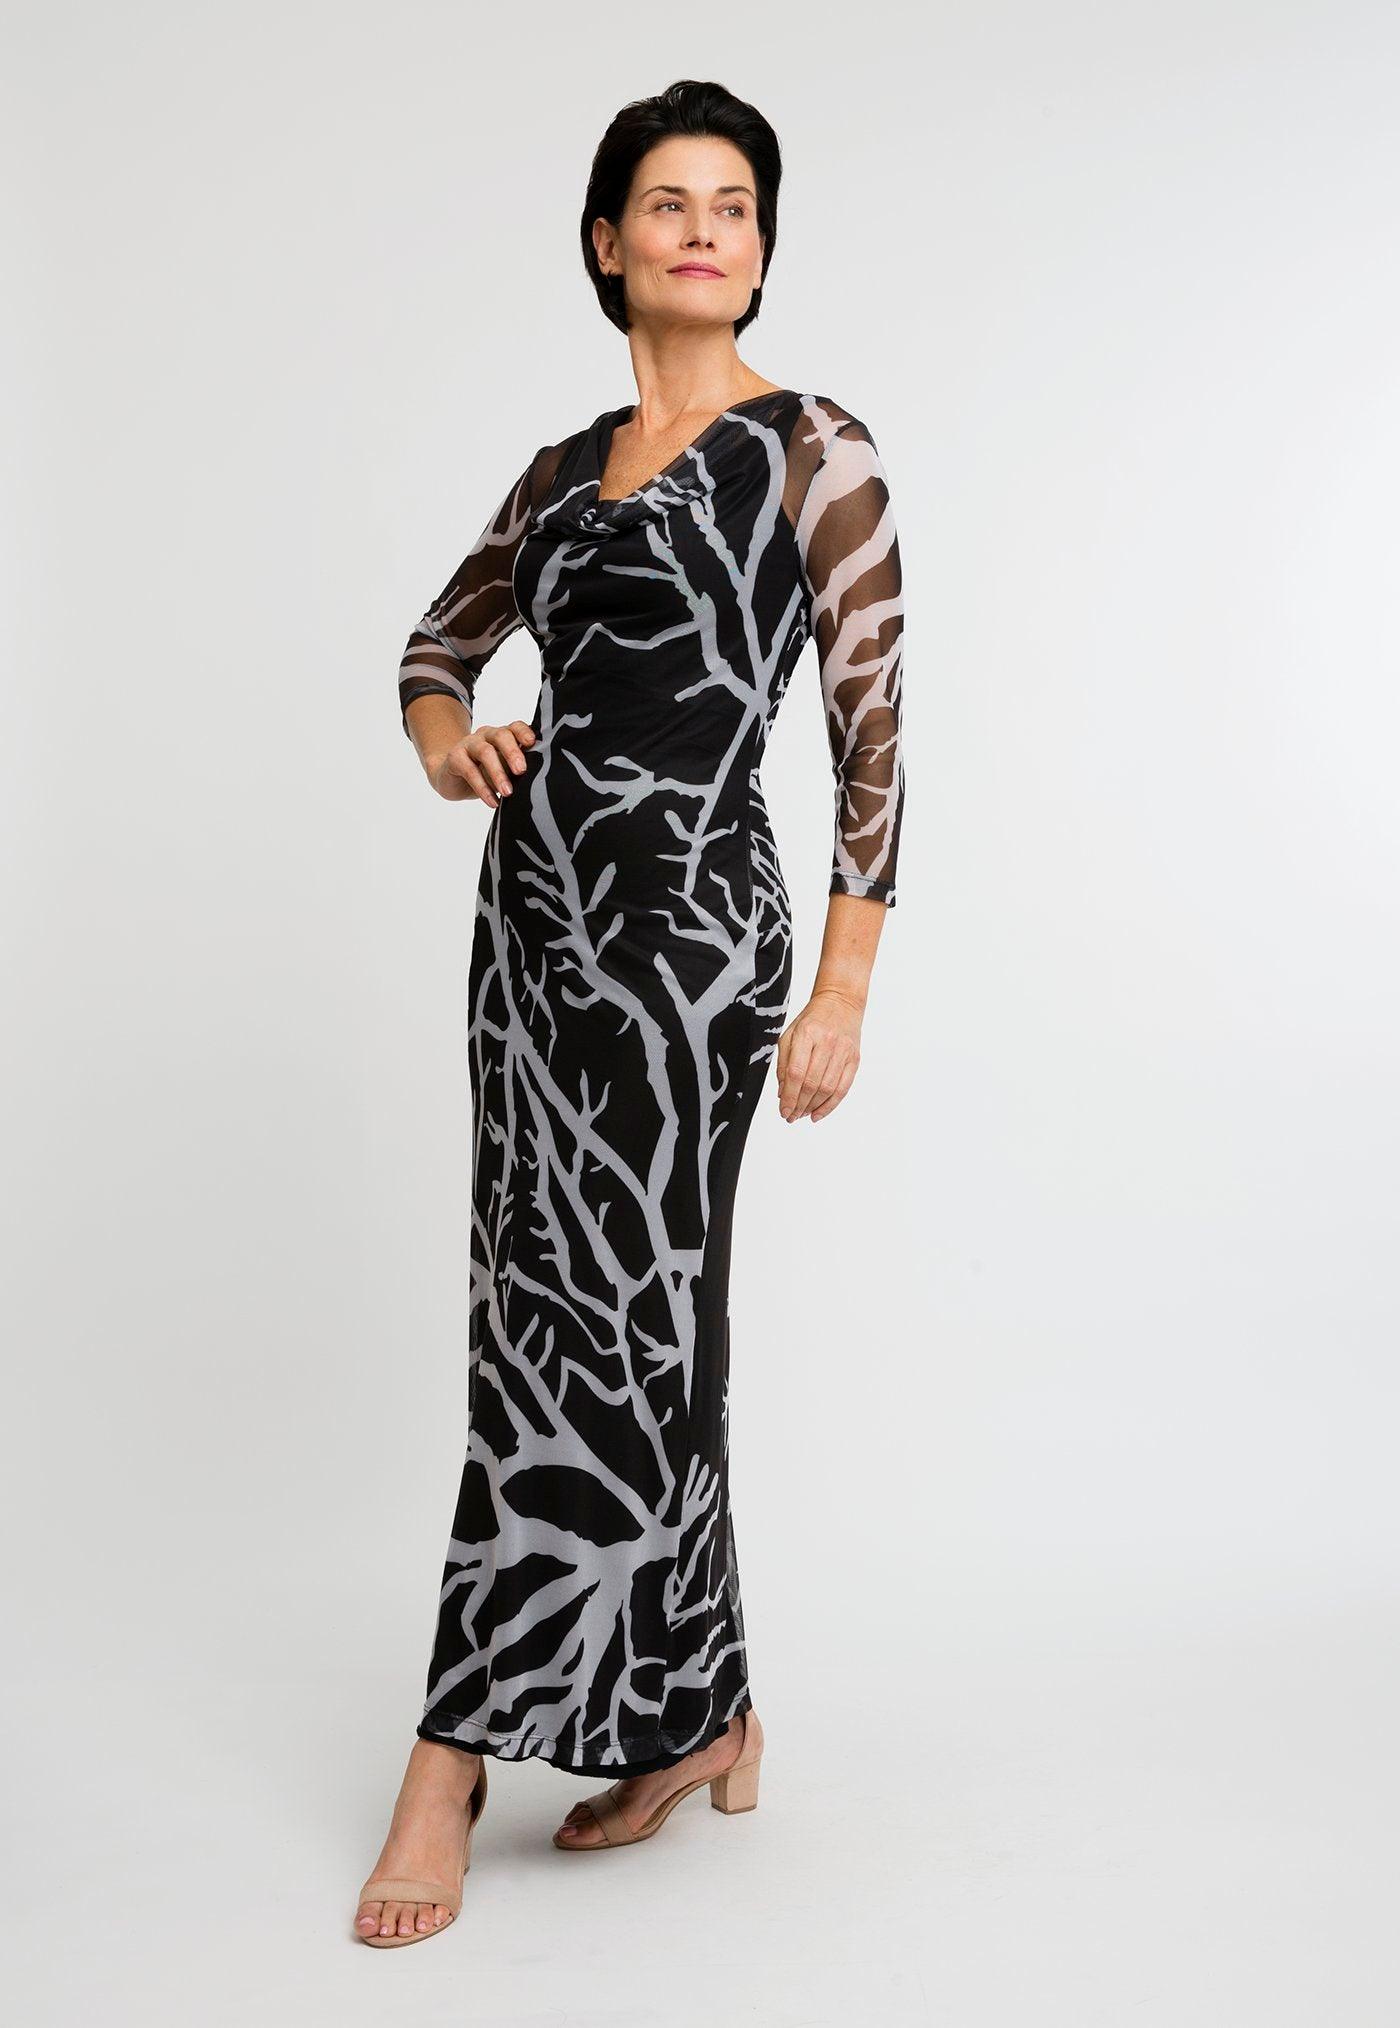 black and white coral printed stretch knit long dress with long mesh black and white coral printed cowl neck dress